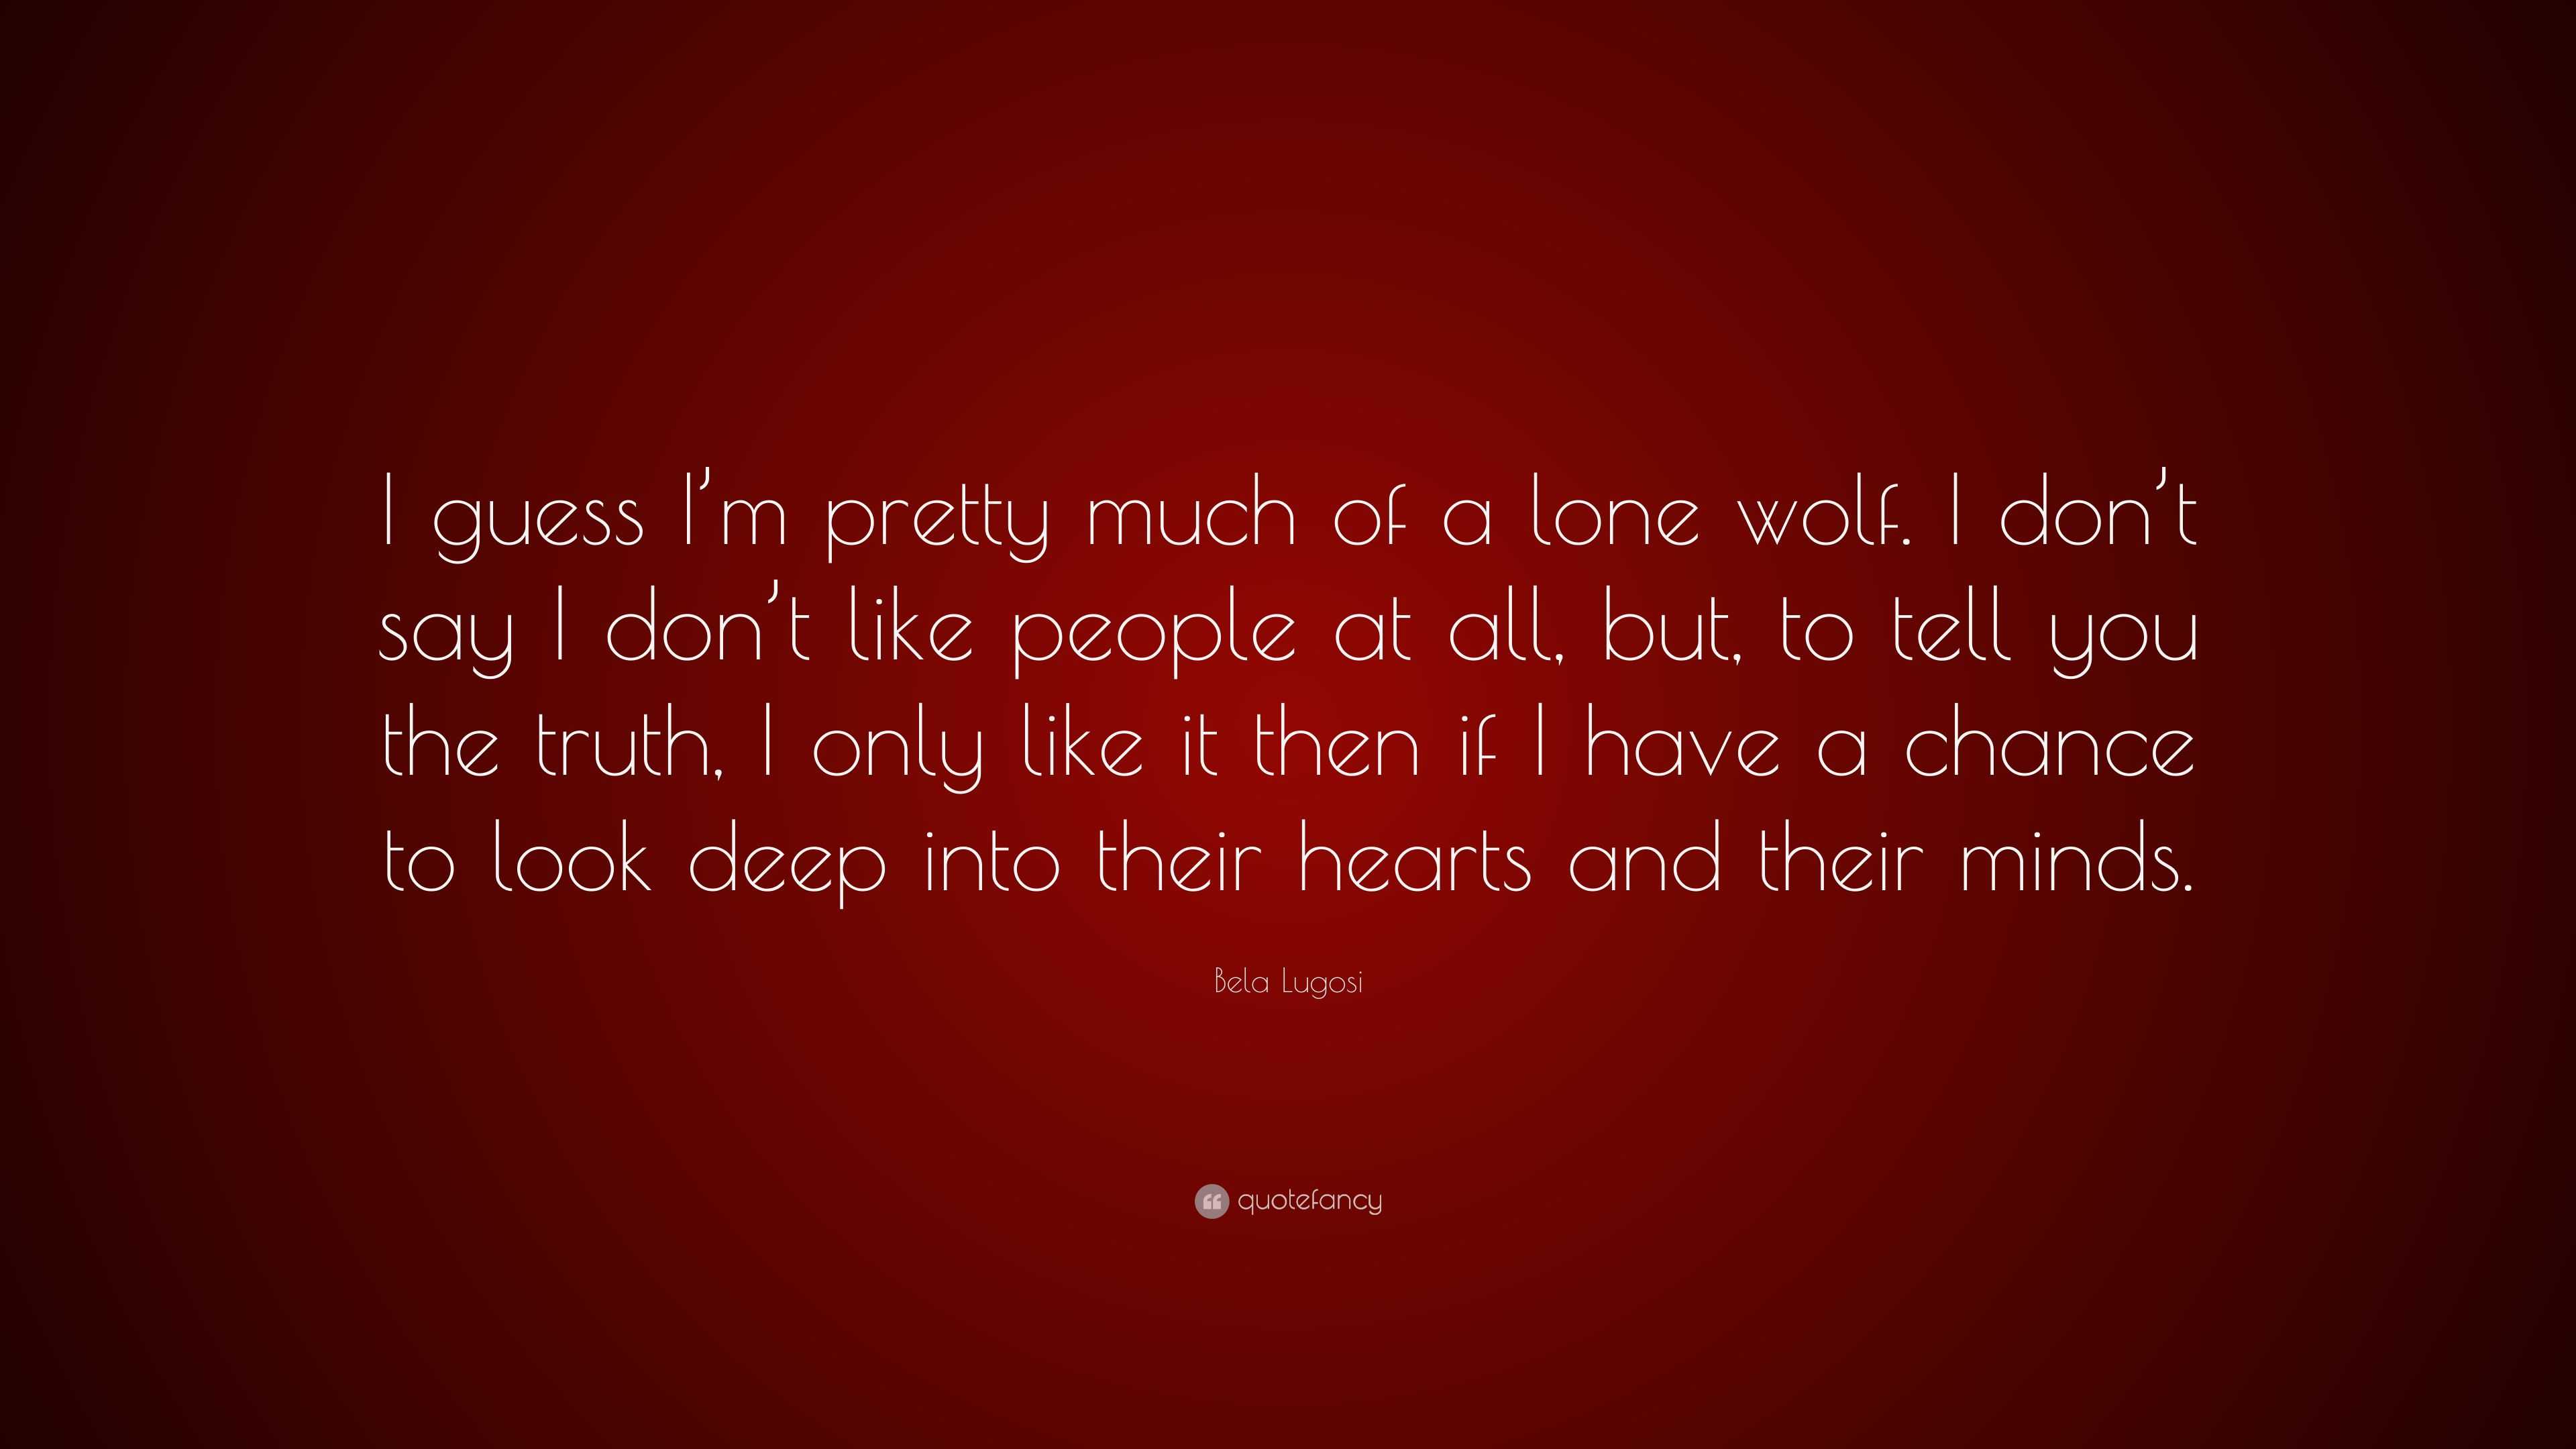 Bela Lugosi Quote: “I guess I’m pretty much of a lone wolf. I don’t say ...